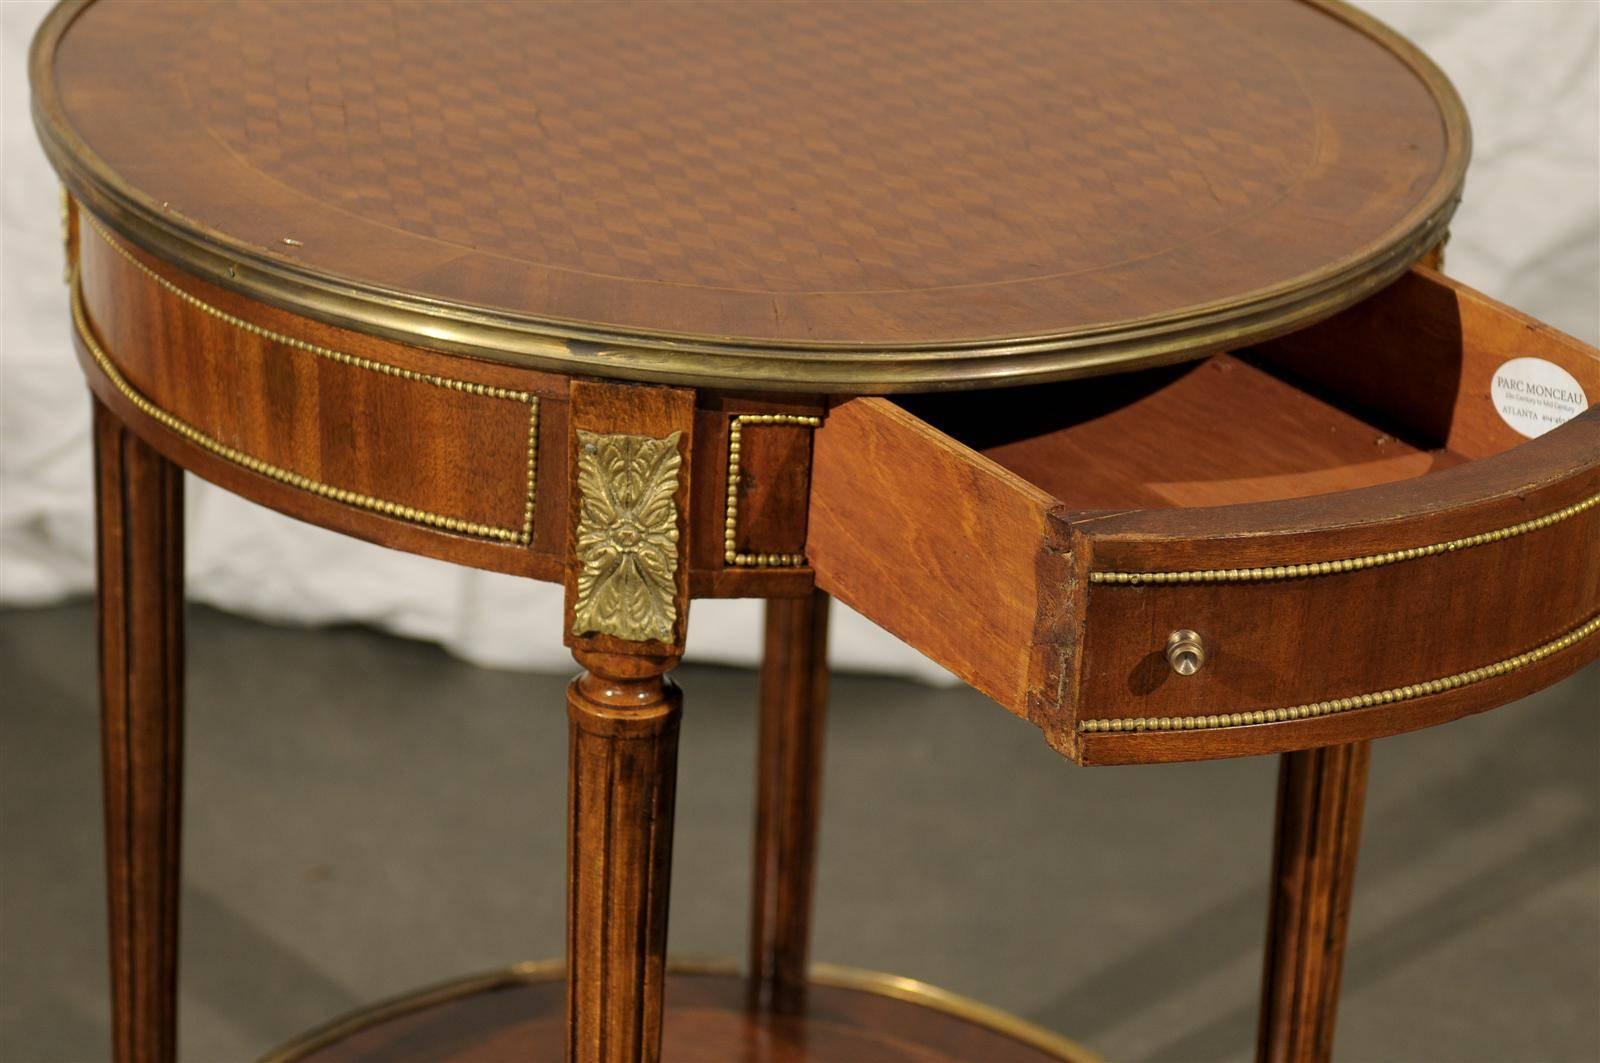 Early 20th Century French Bronze-Mounted Inlaid Bouilotte Table 3